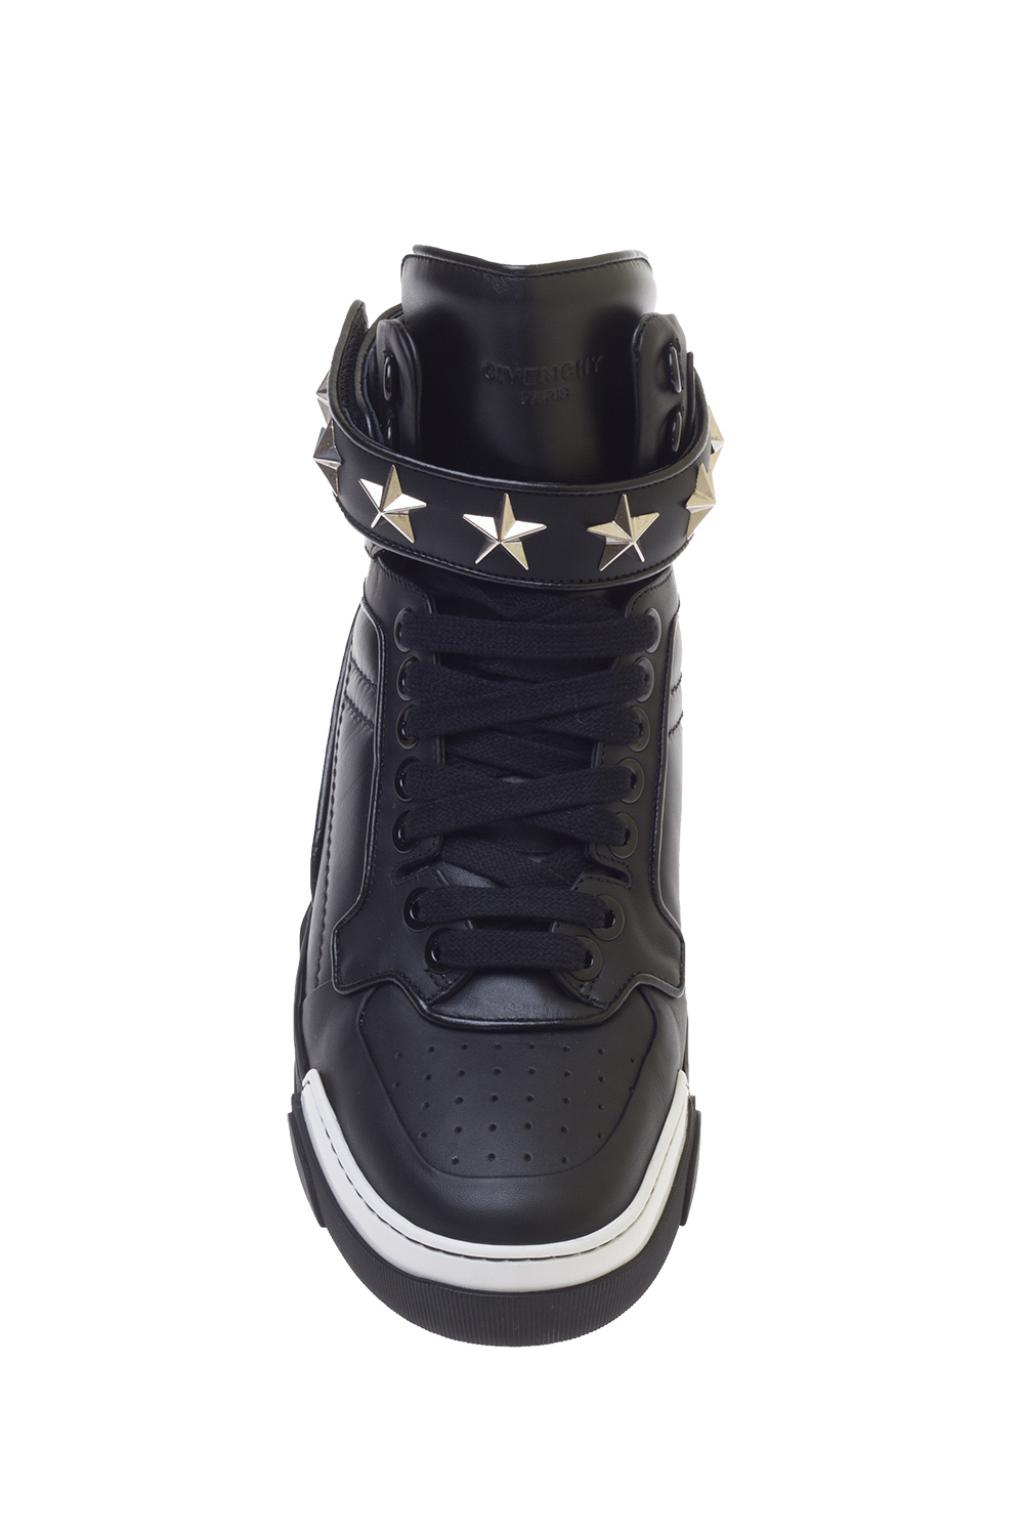 givenchy star shoes